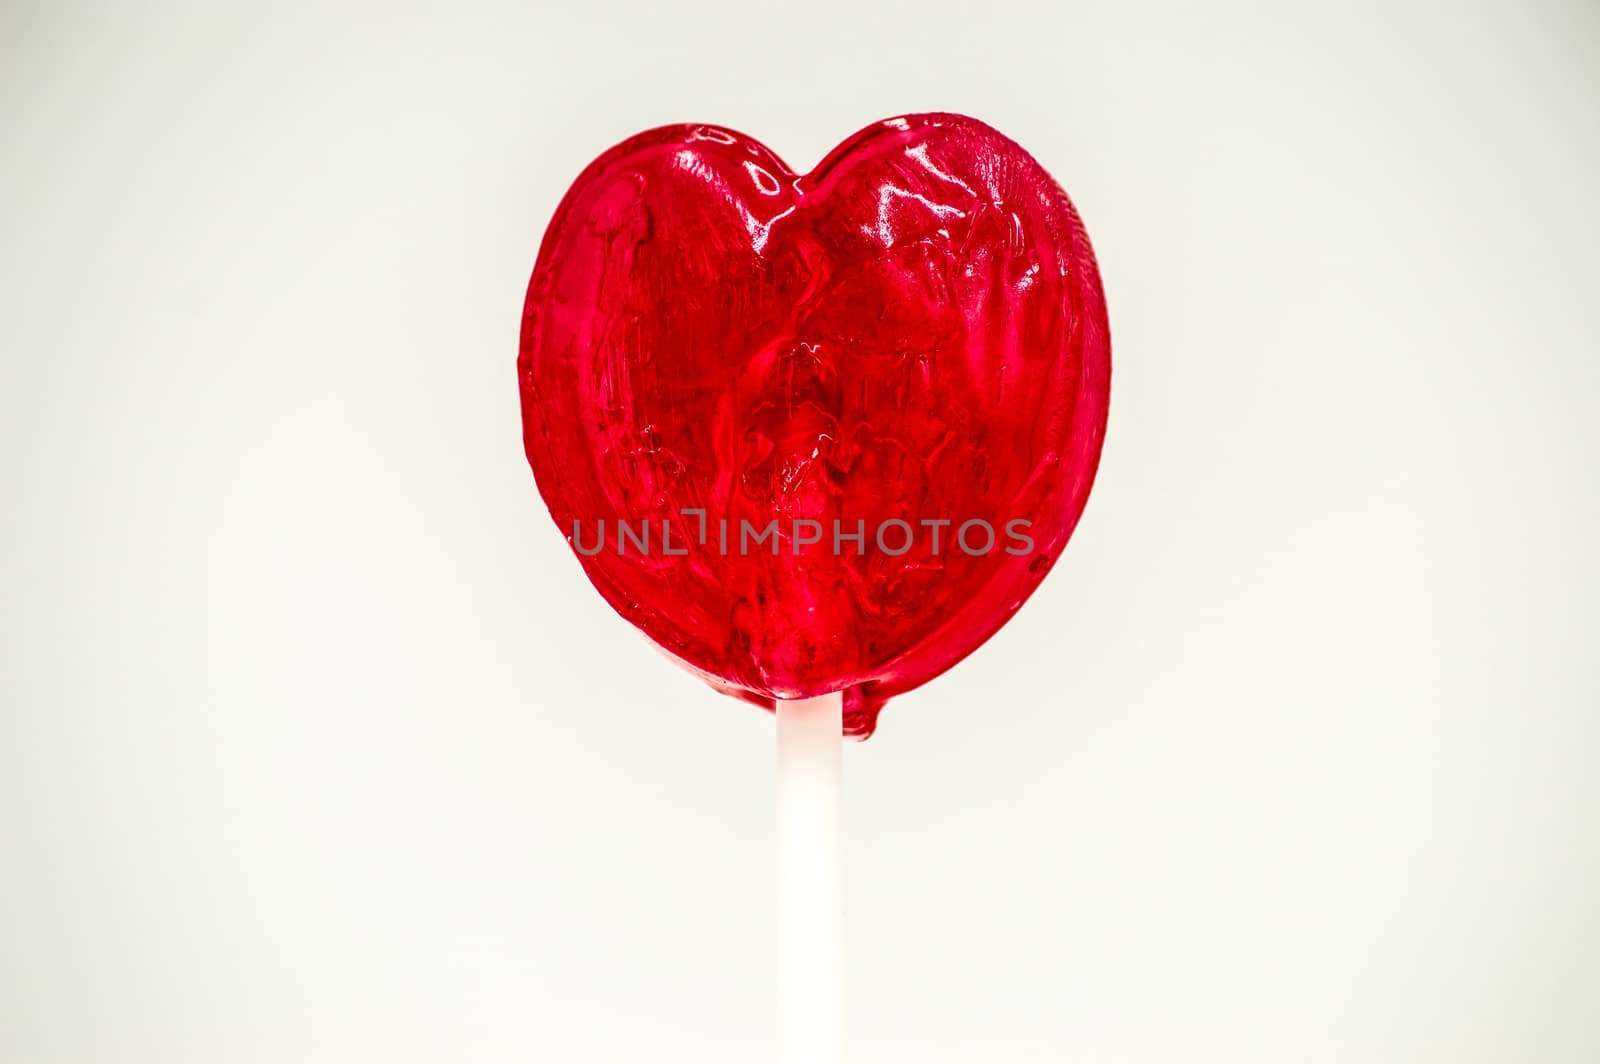 Heart shaped red lollipop  by Philou1000